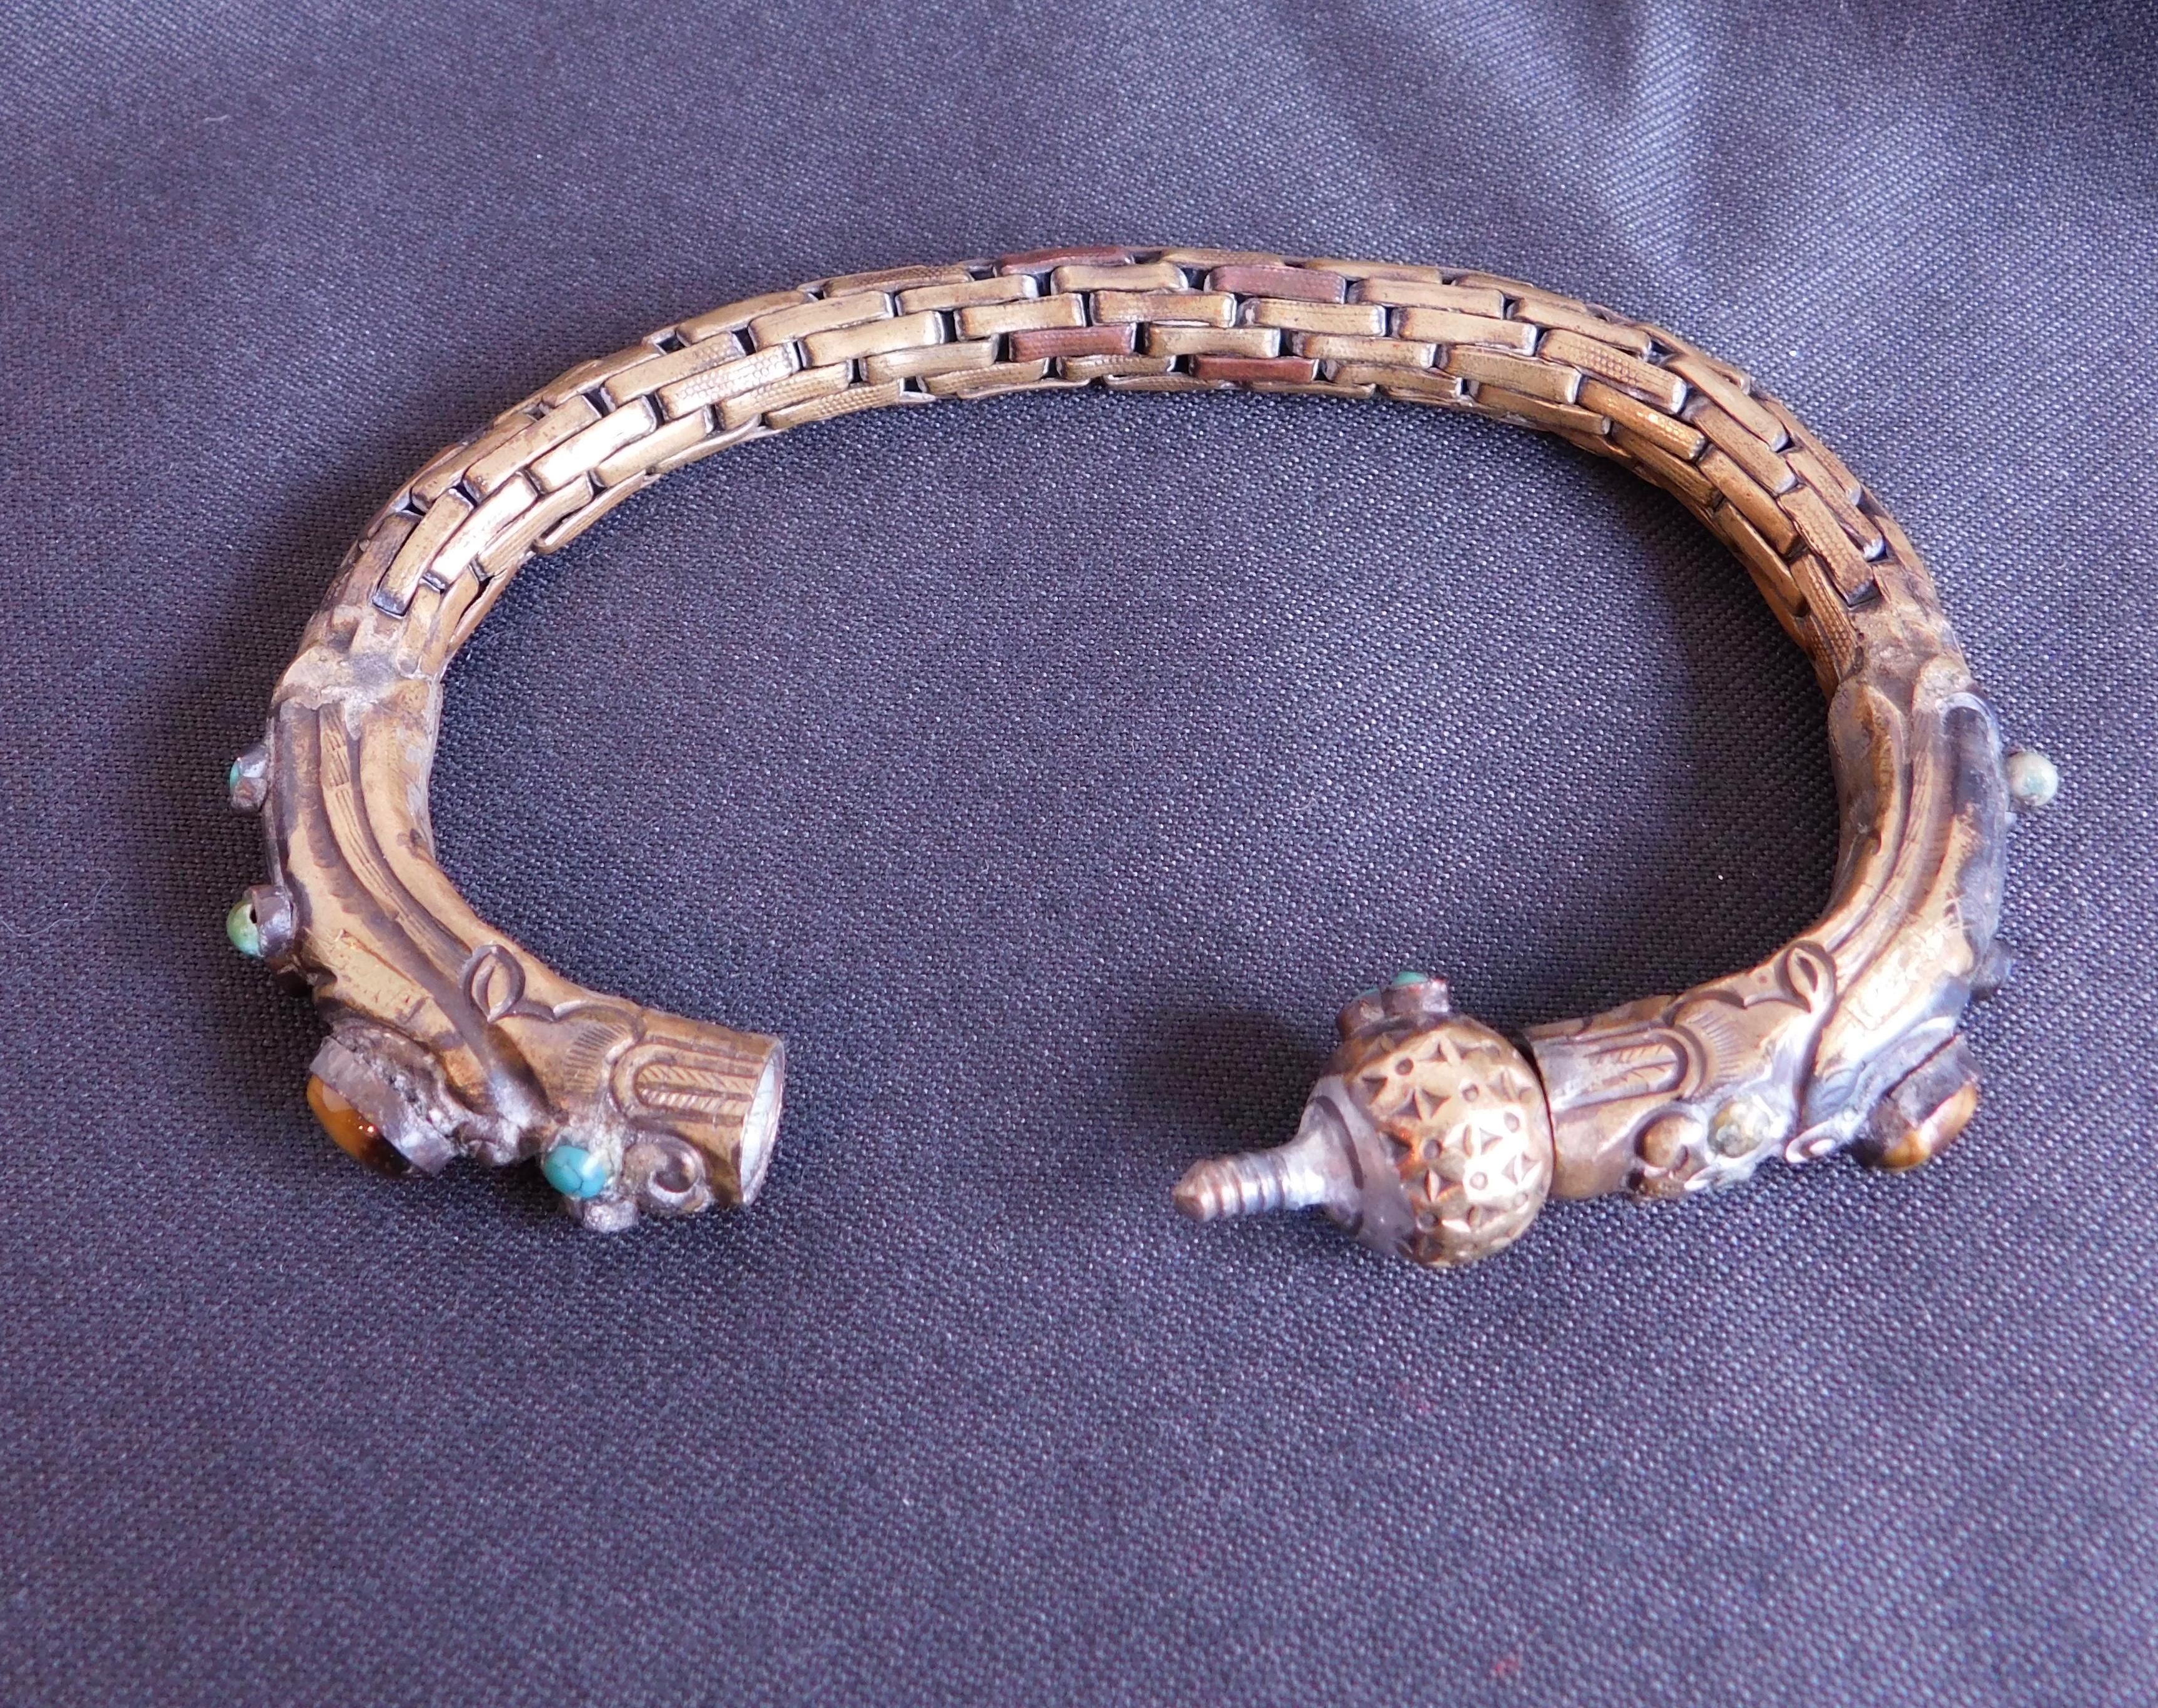 Handmade Chinese Minority bracelet of brass decorated with bezel set turquoise and tiger eye stones. The end can be unscrewed .
Interior circumference=19.50 cm